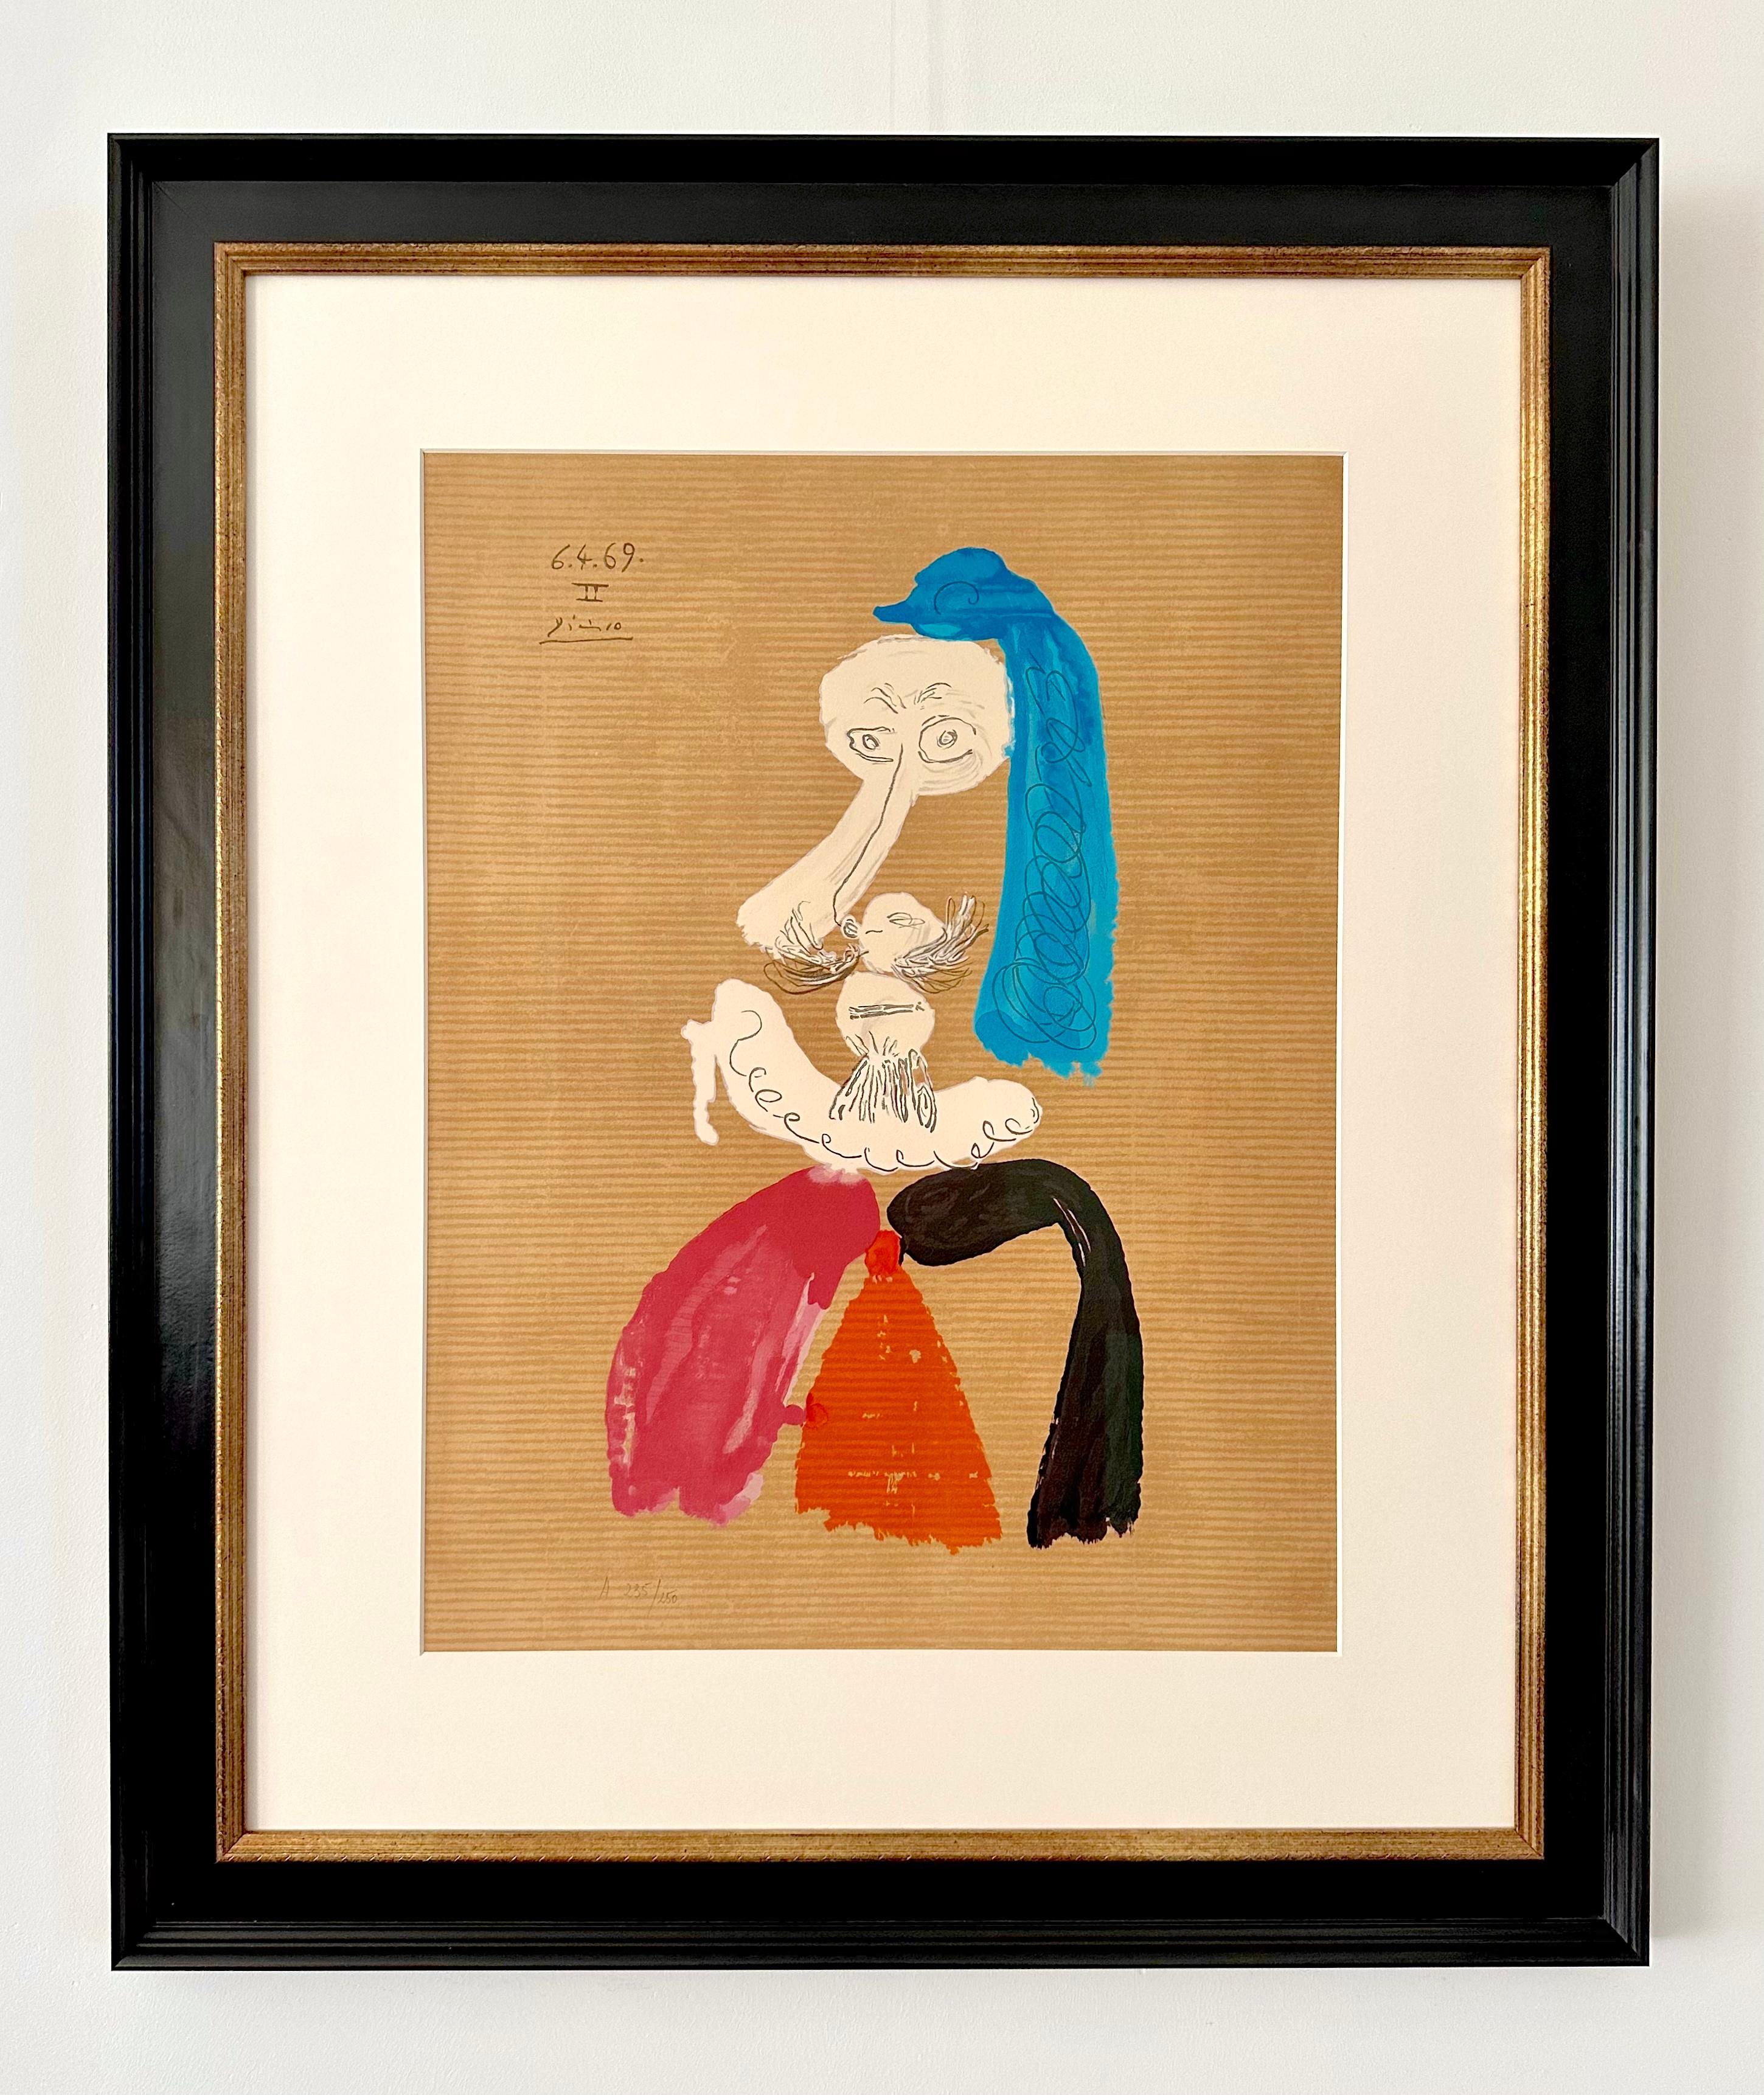 Pablo Picasso – Portraits Imaginaires 6.4.69 II
Color lithograph from the serie ‘Portraits Imaginaires’
Published by Georges Salinas, 1970
Edition: 250 for France (F) and 250 for America (A)
Signed in the stone, numbered (A 235 /250) in